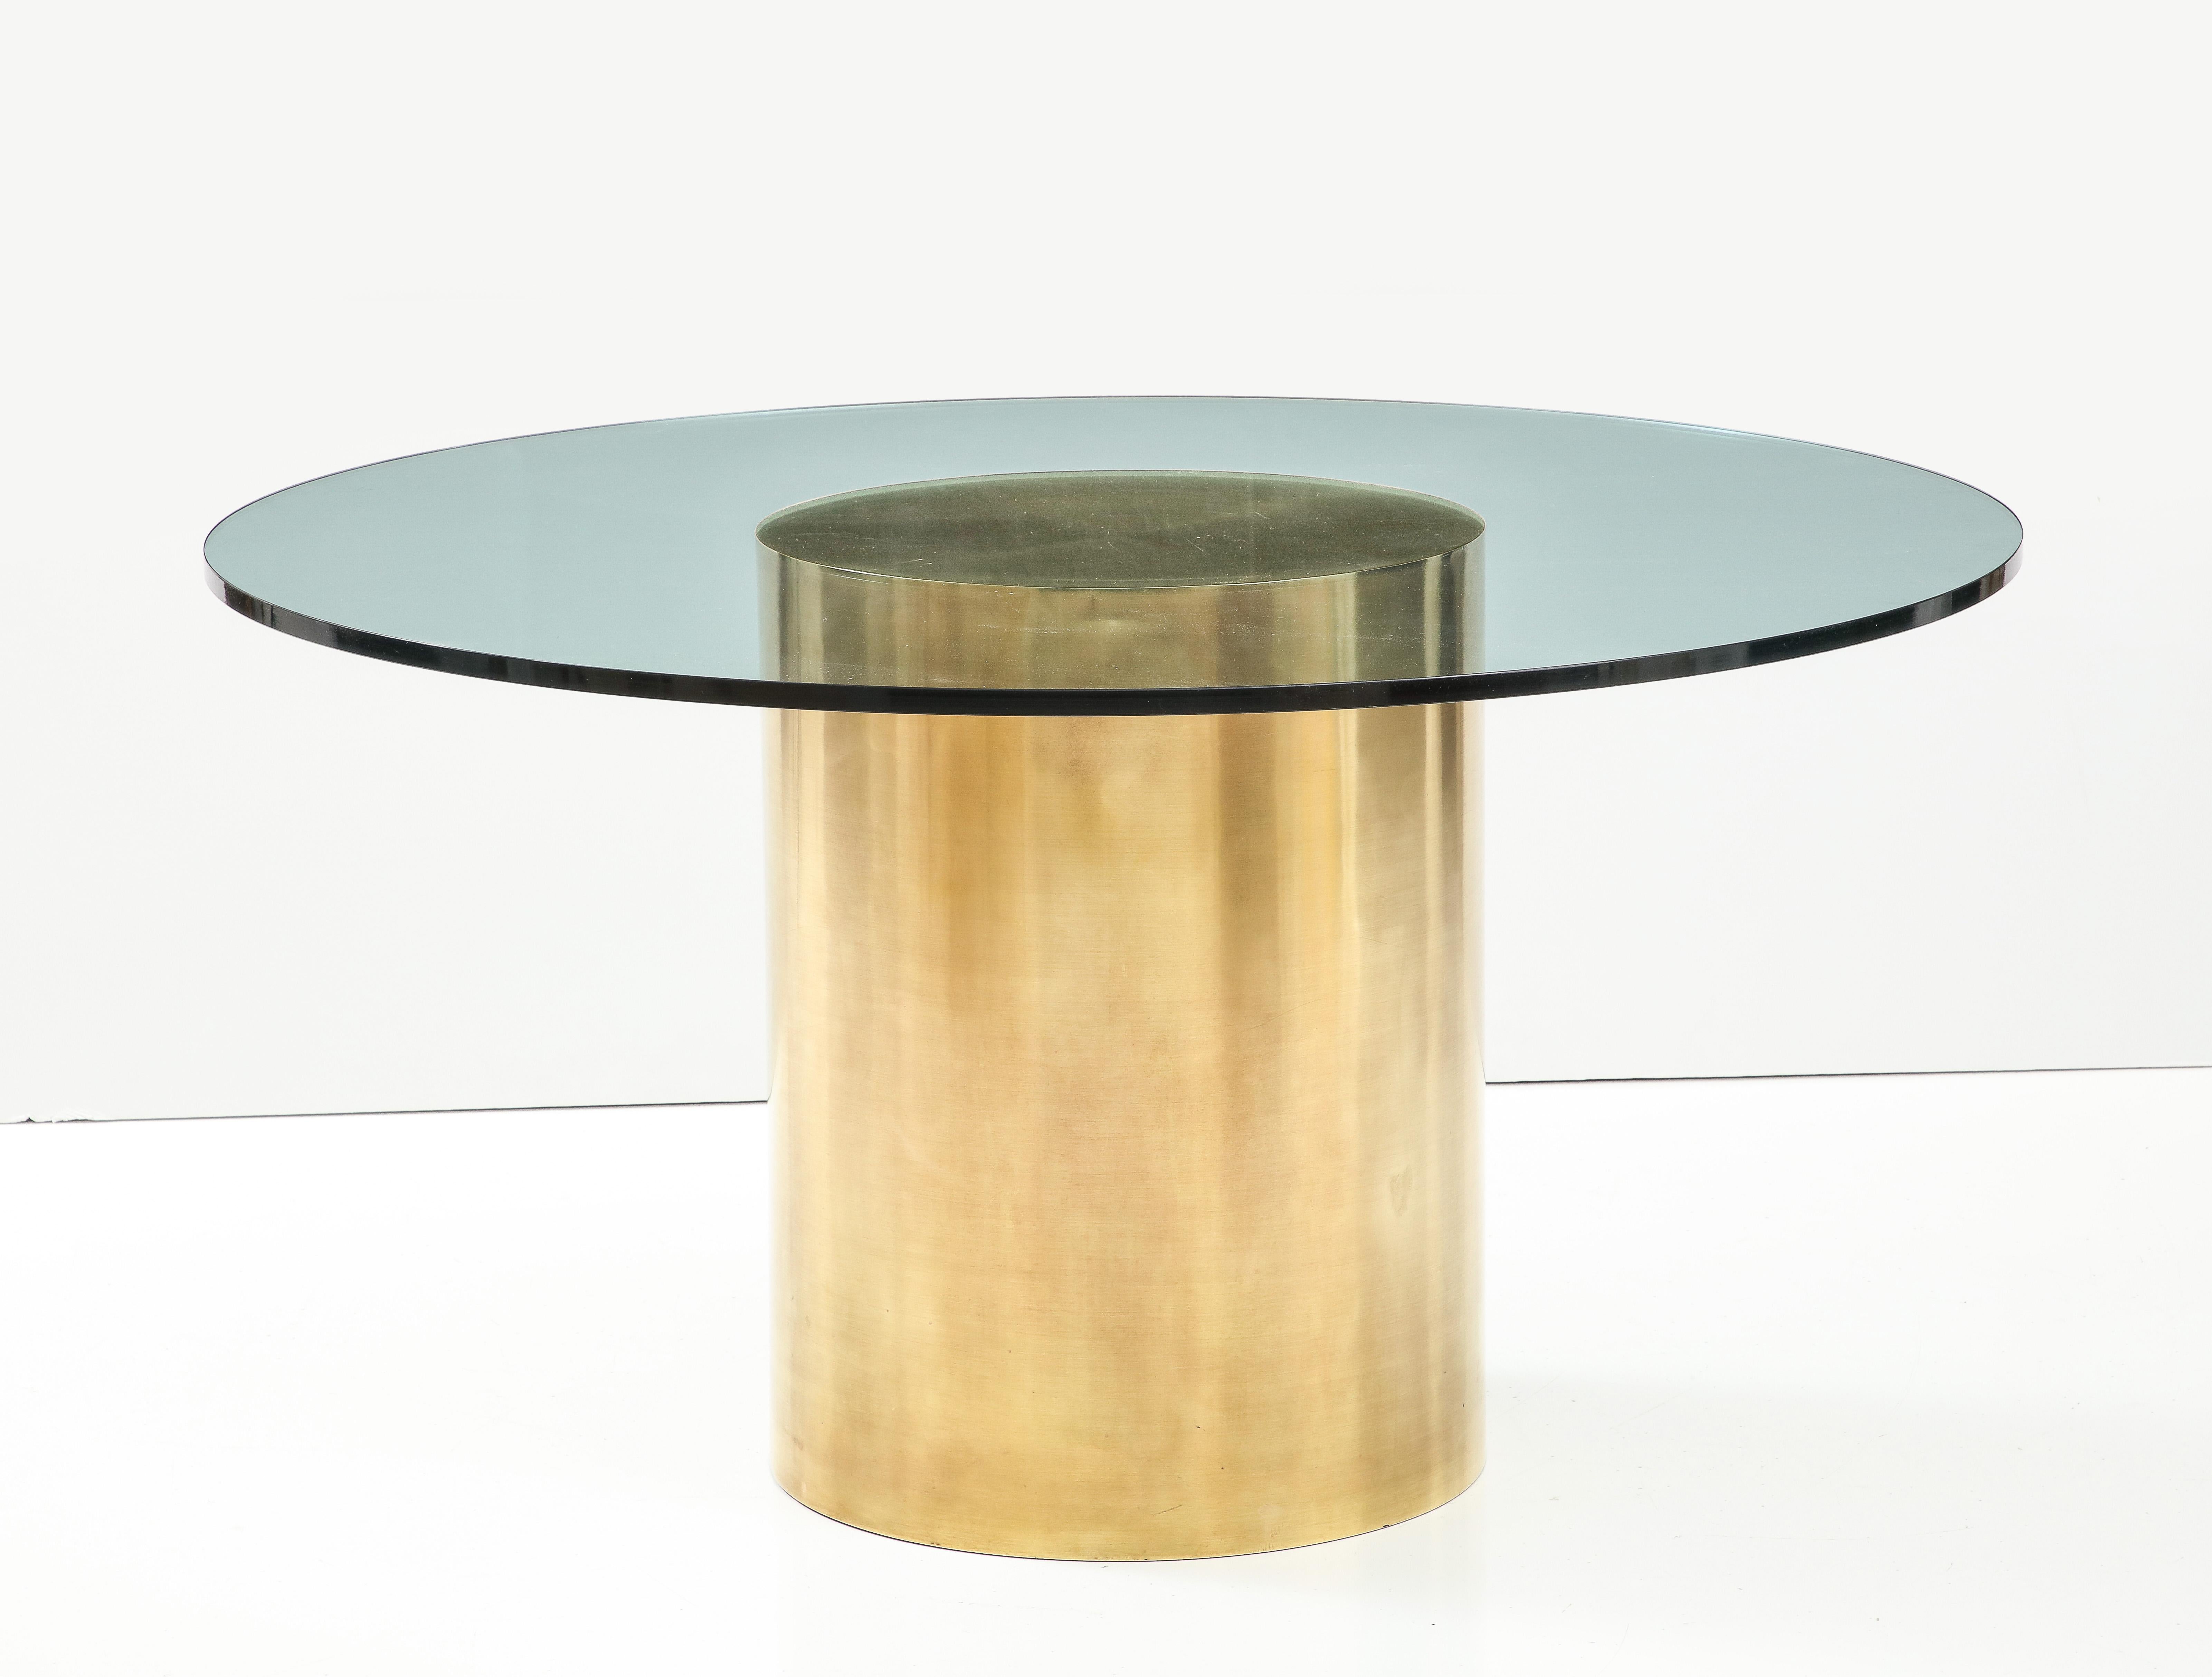 Stunning 1970's Mid-Century Modern solid brass drum base with 3/4 glass dining table attributed to Brueton, in vintage original condition with beautiful patina to the brass, with some wear to the base due to age and use, there is a few light